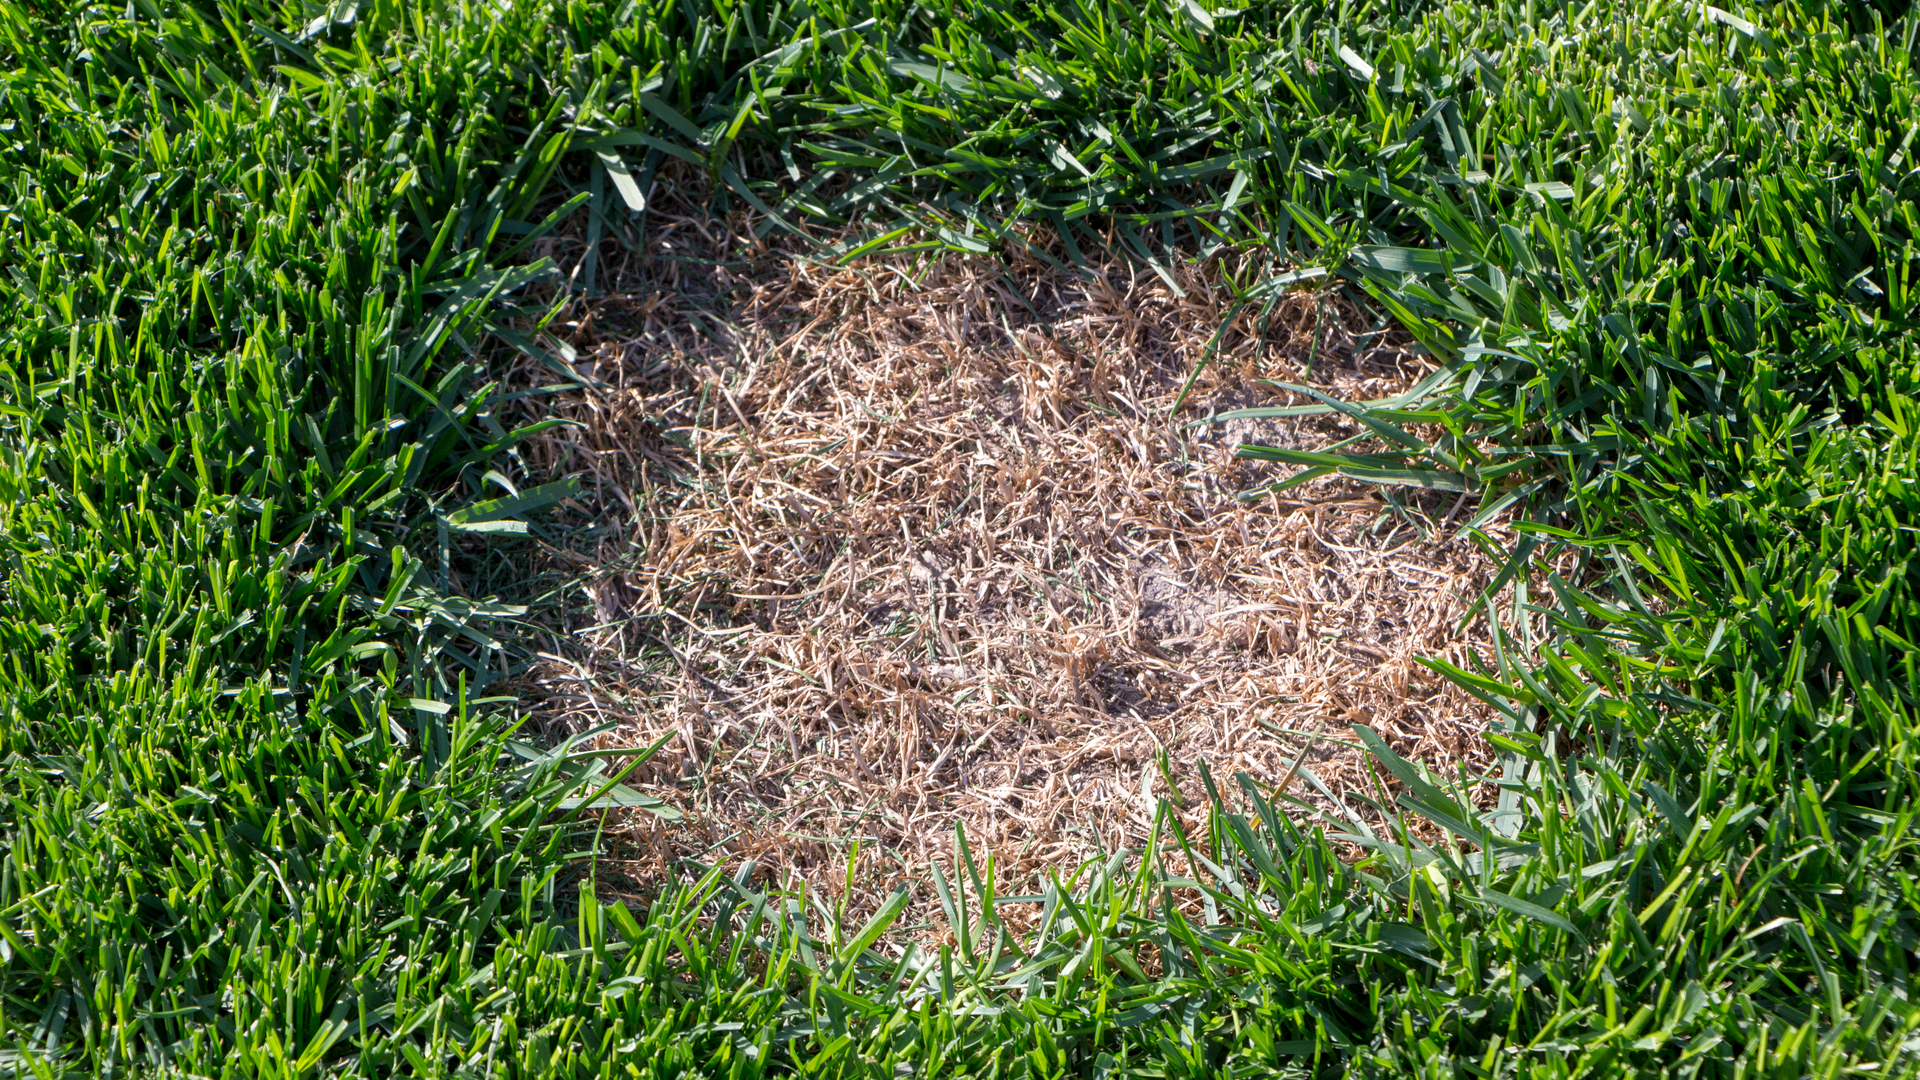 How to Deal With Dollar Spot if It Infects Your Lawn